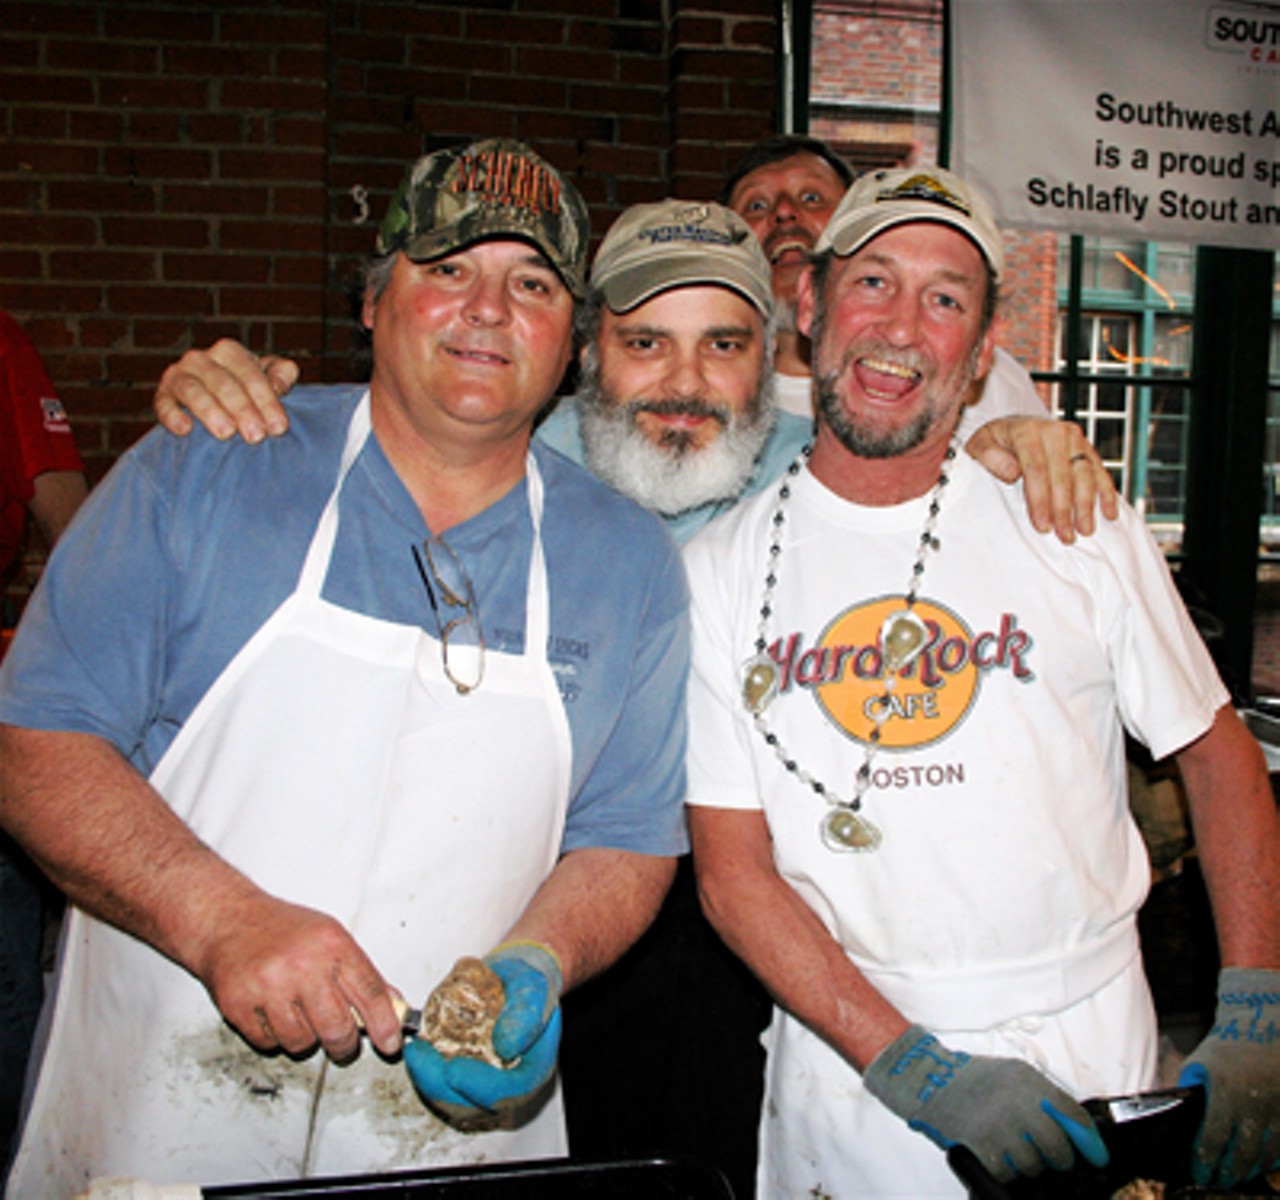 A few of the spirited guest-shucker crew. Notice the excellent oyster bling!